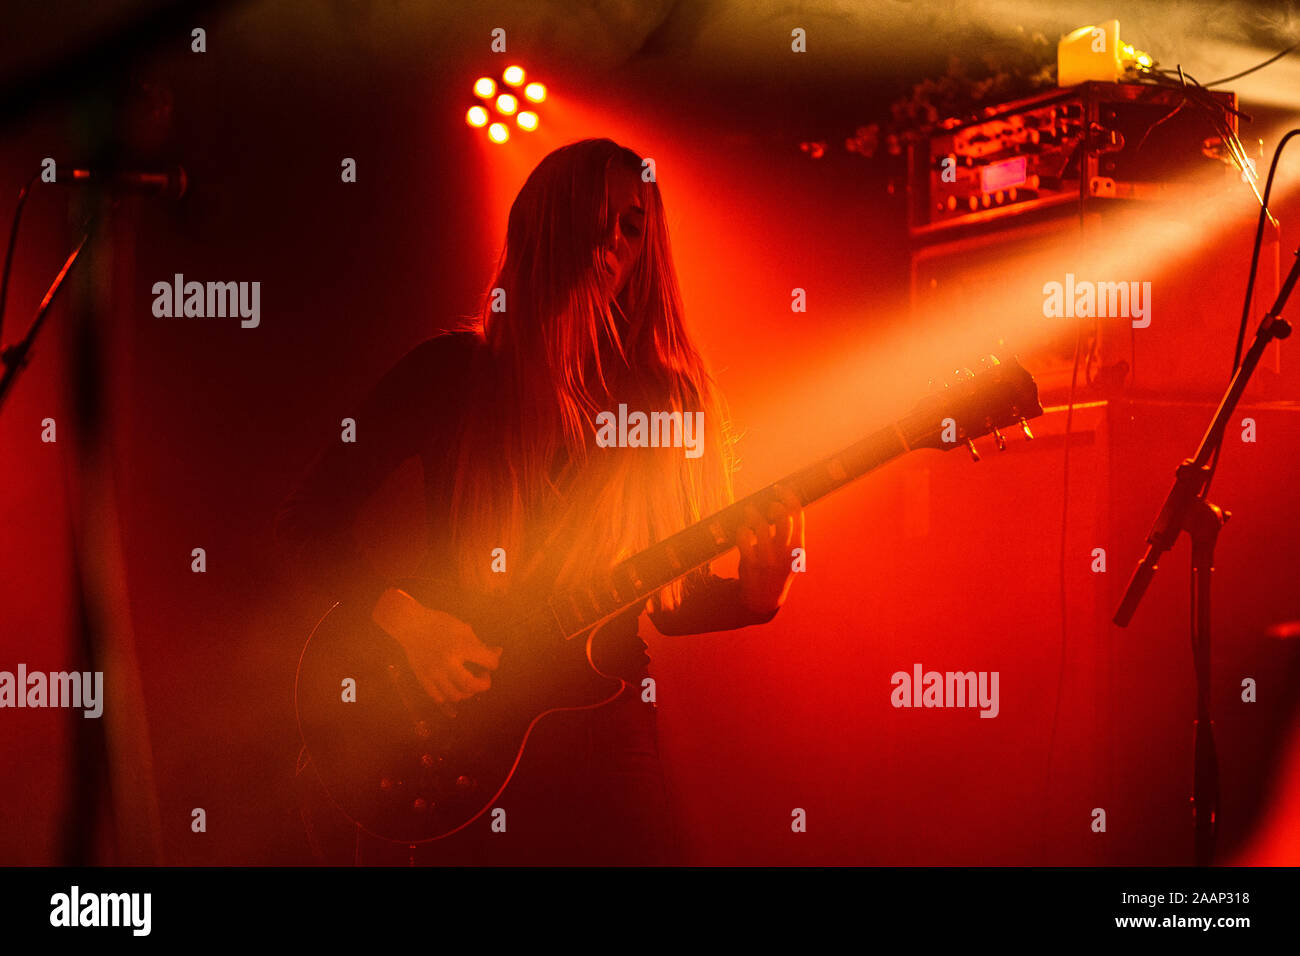 Copenhagen, Denmark. 21st, November 2019. The Swiss metal band E-L-R performs a live concert at Stengade in Copenhagen. Here vocalist and guitarist S.M. is seen live on stage. (Photo credit: Gonzales Photo - Peter Troest). Stock Photo